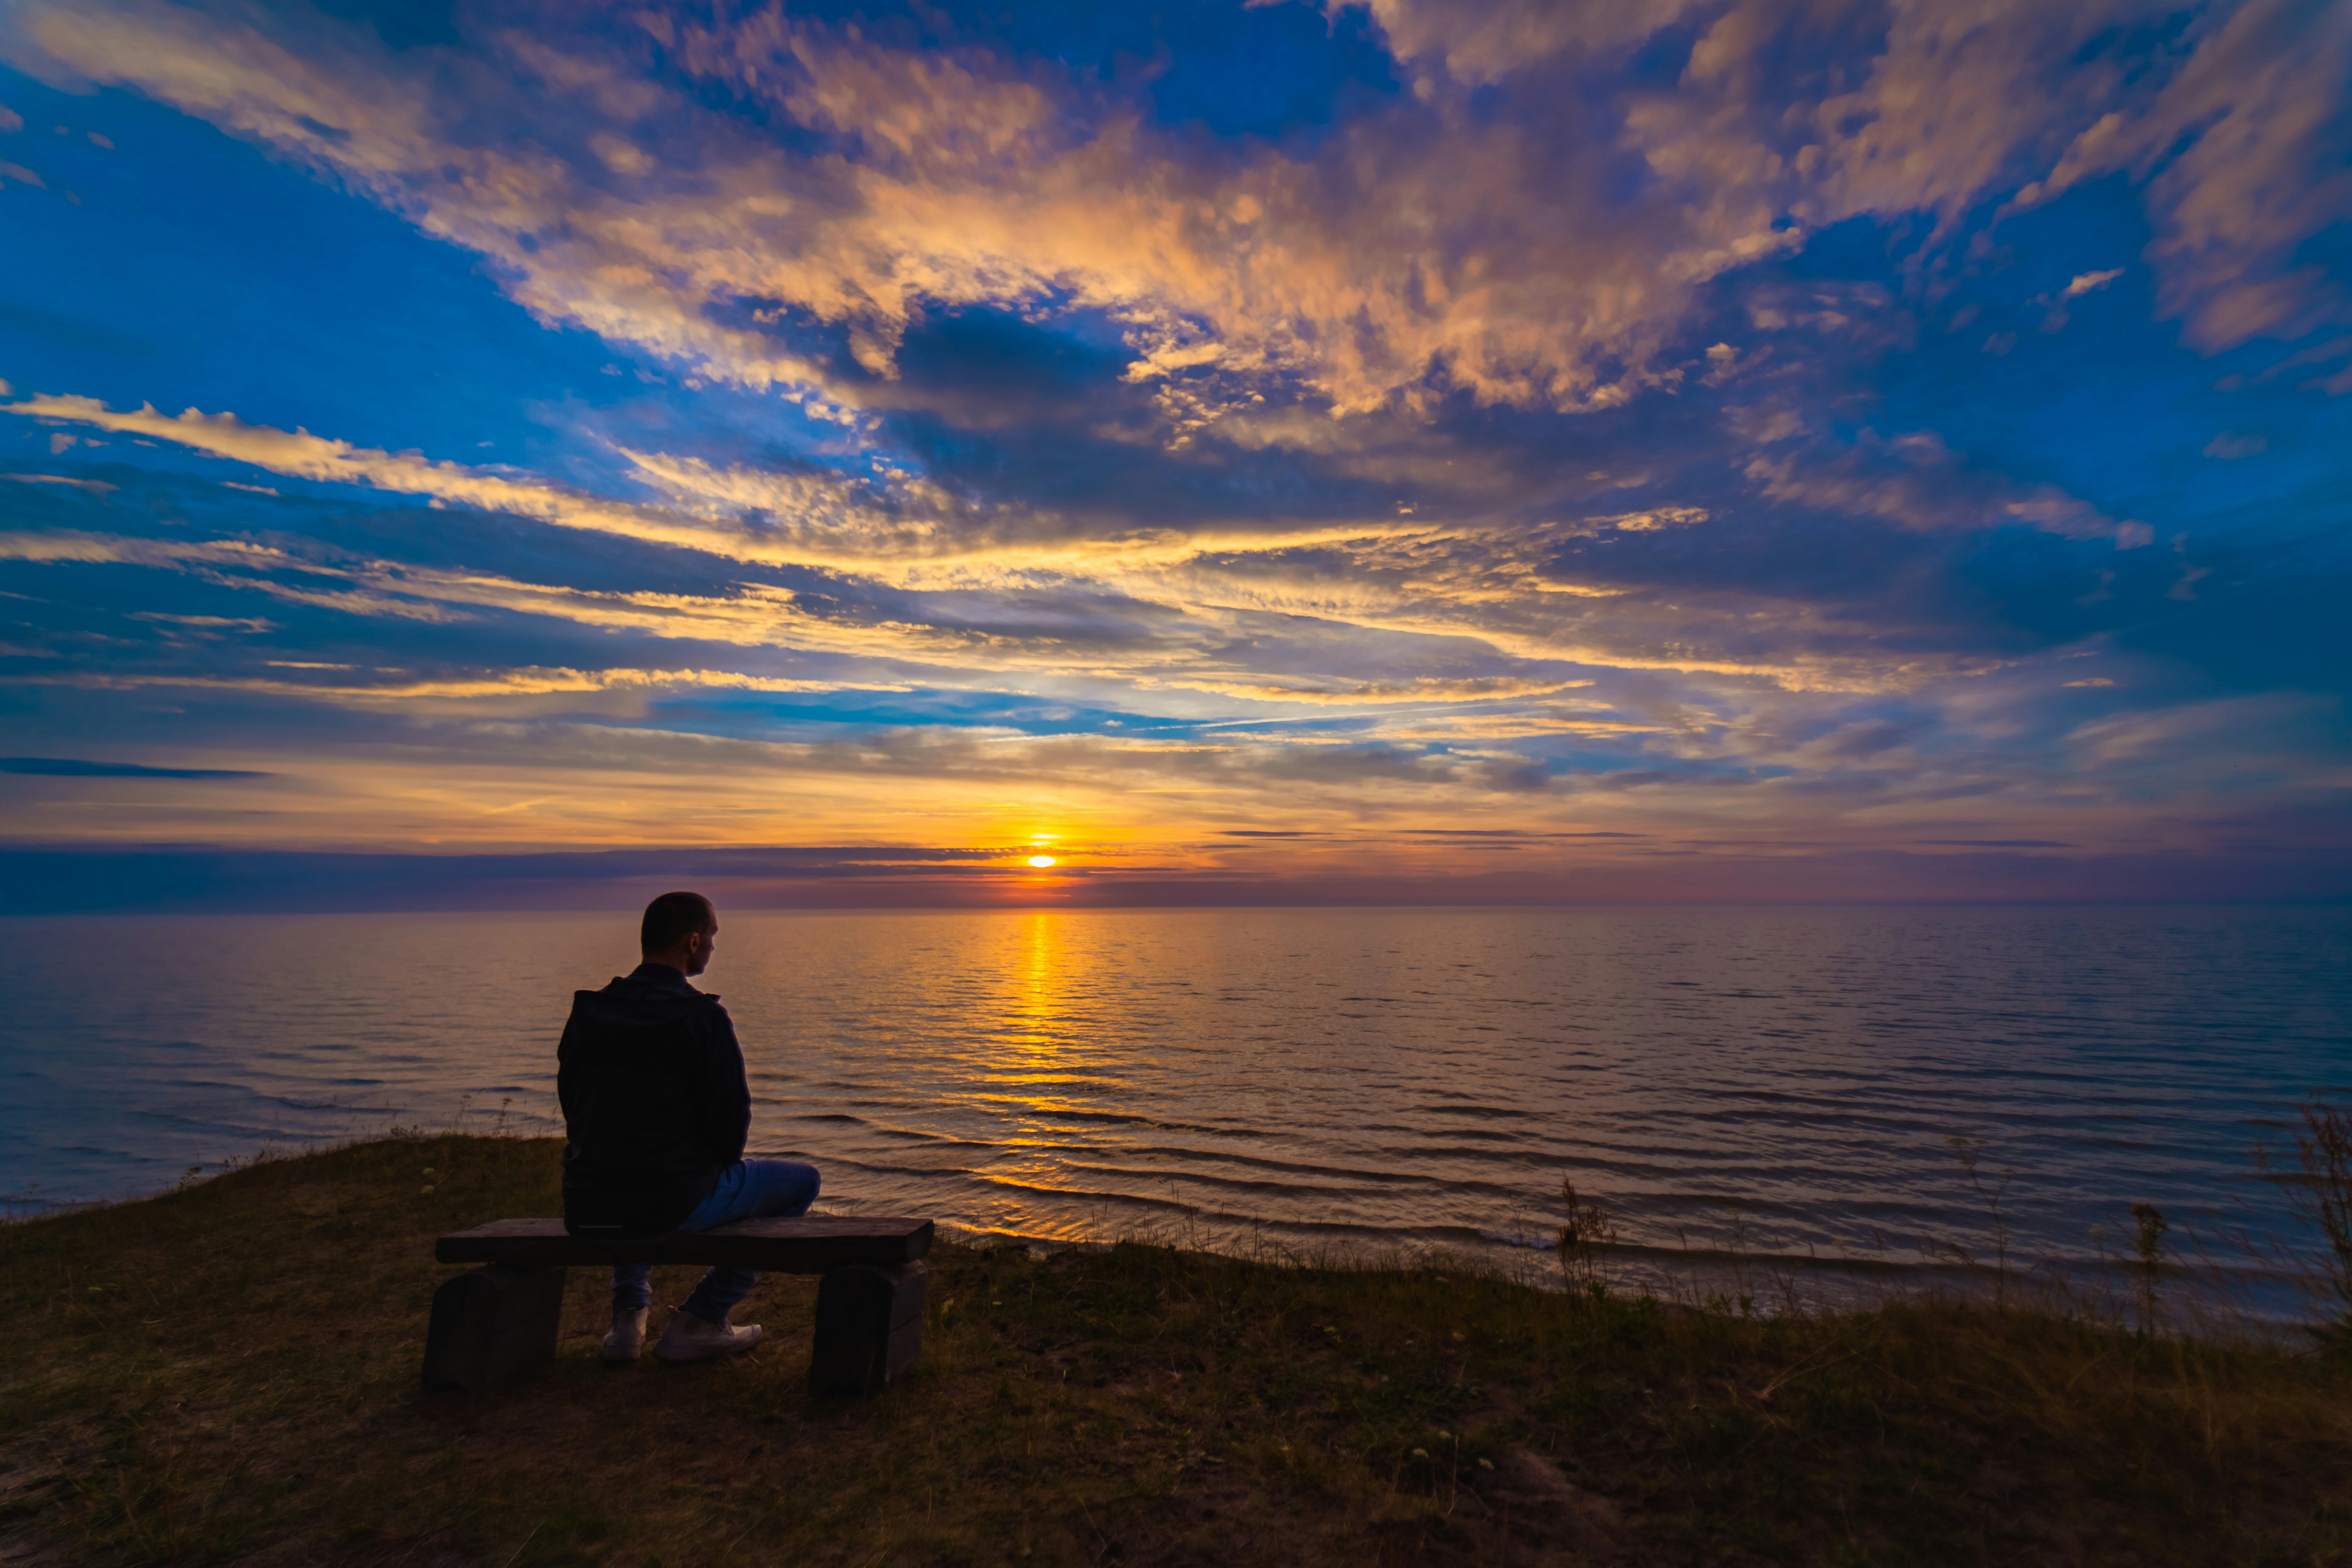 man sitting on bench near body of water during sunset